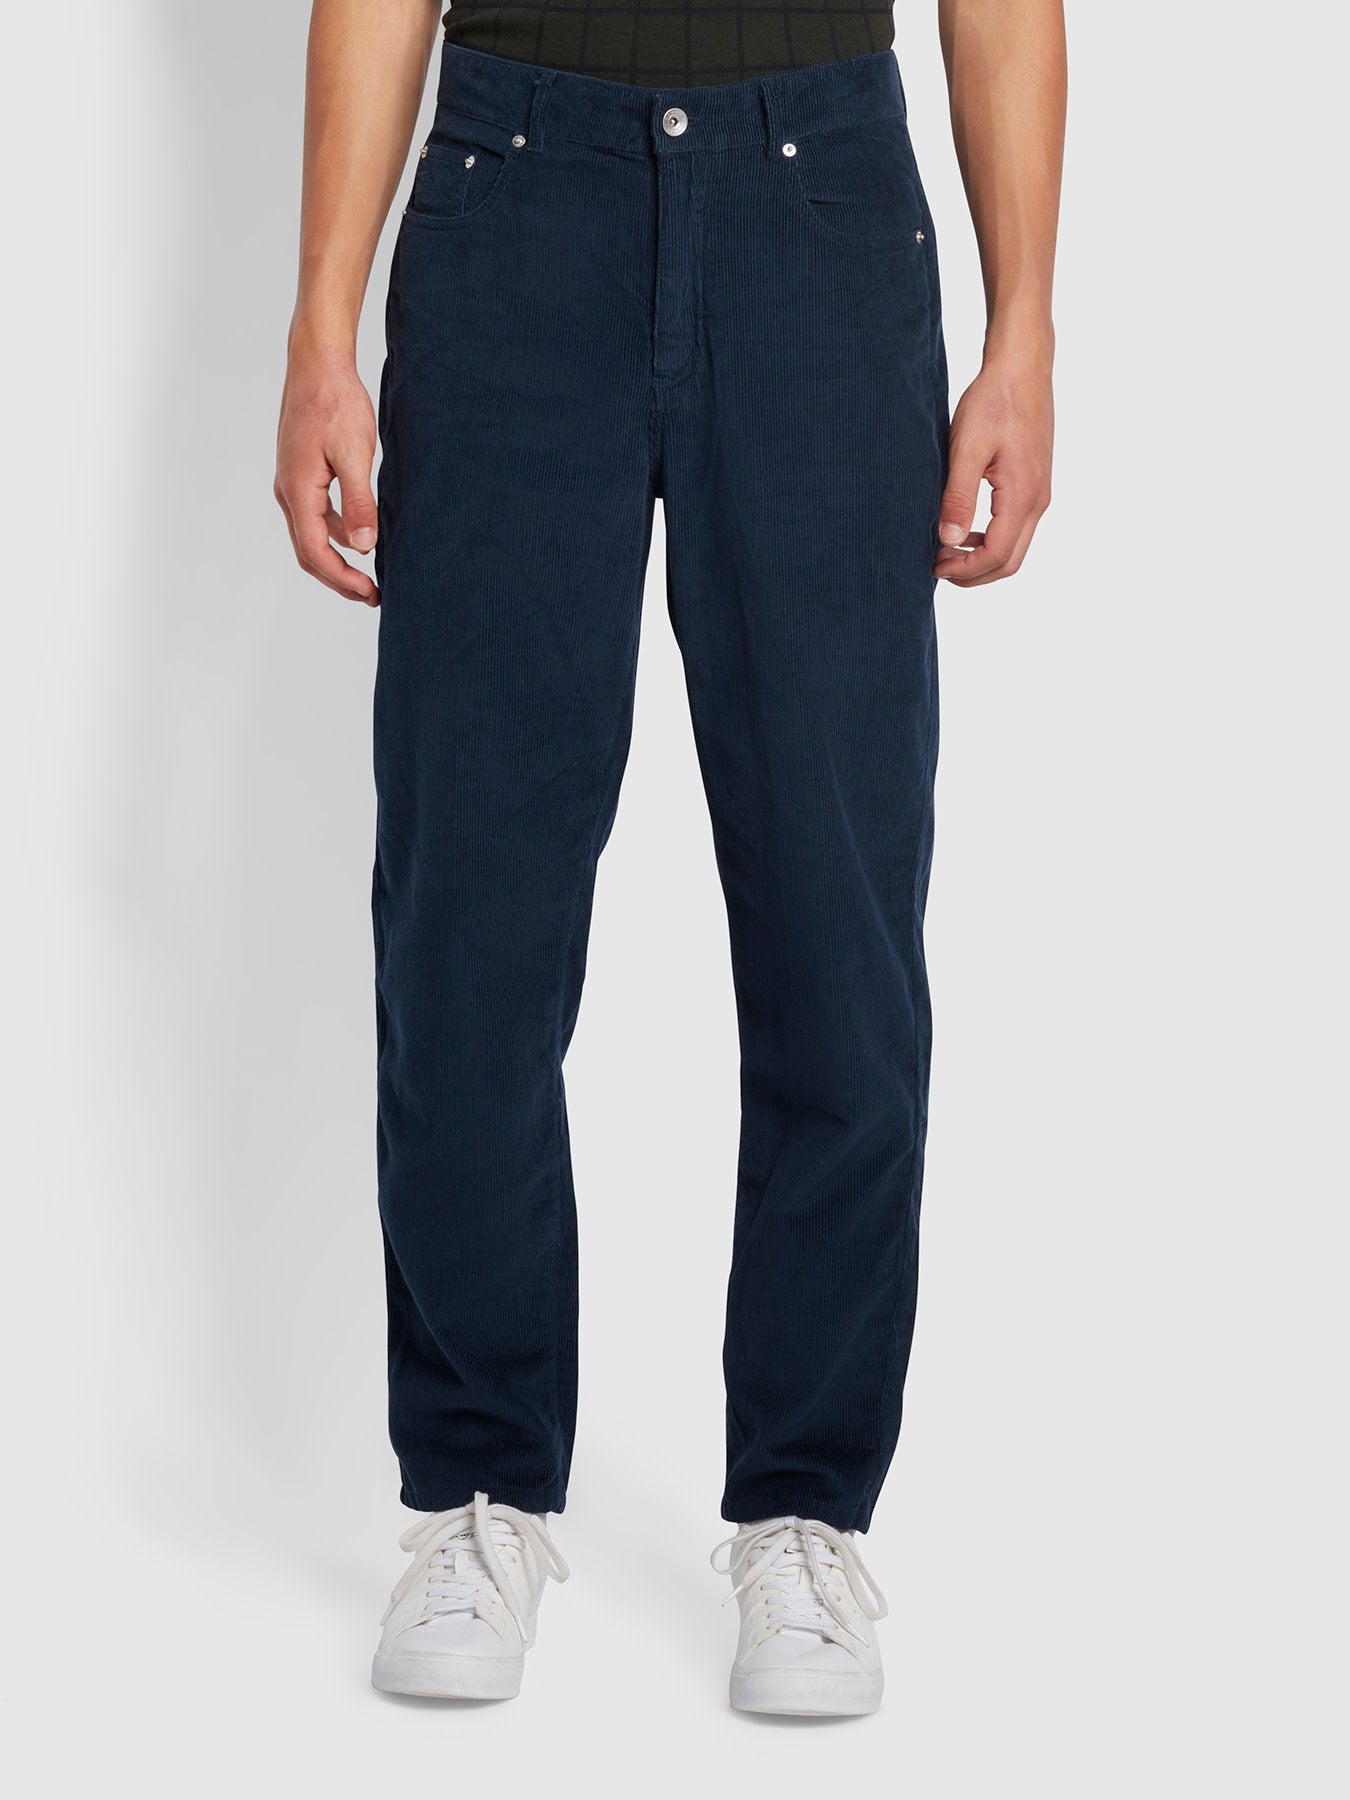 View Rushmore Regular Fit Cotton Corduroy Tapered Jeans In True Navy information